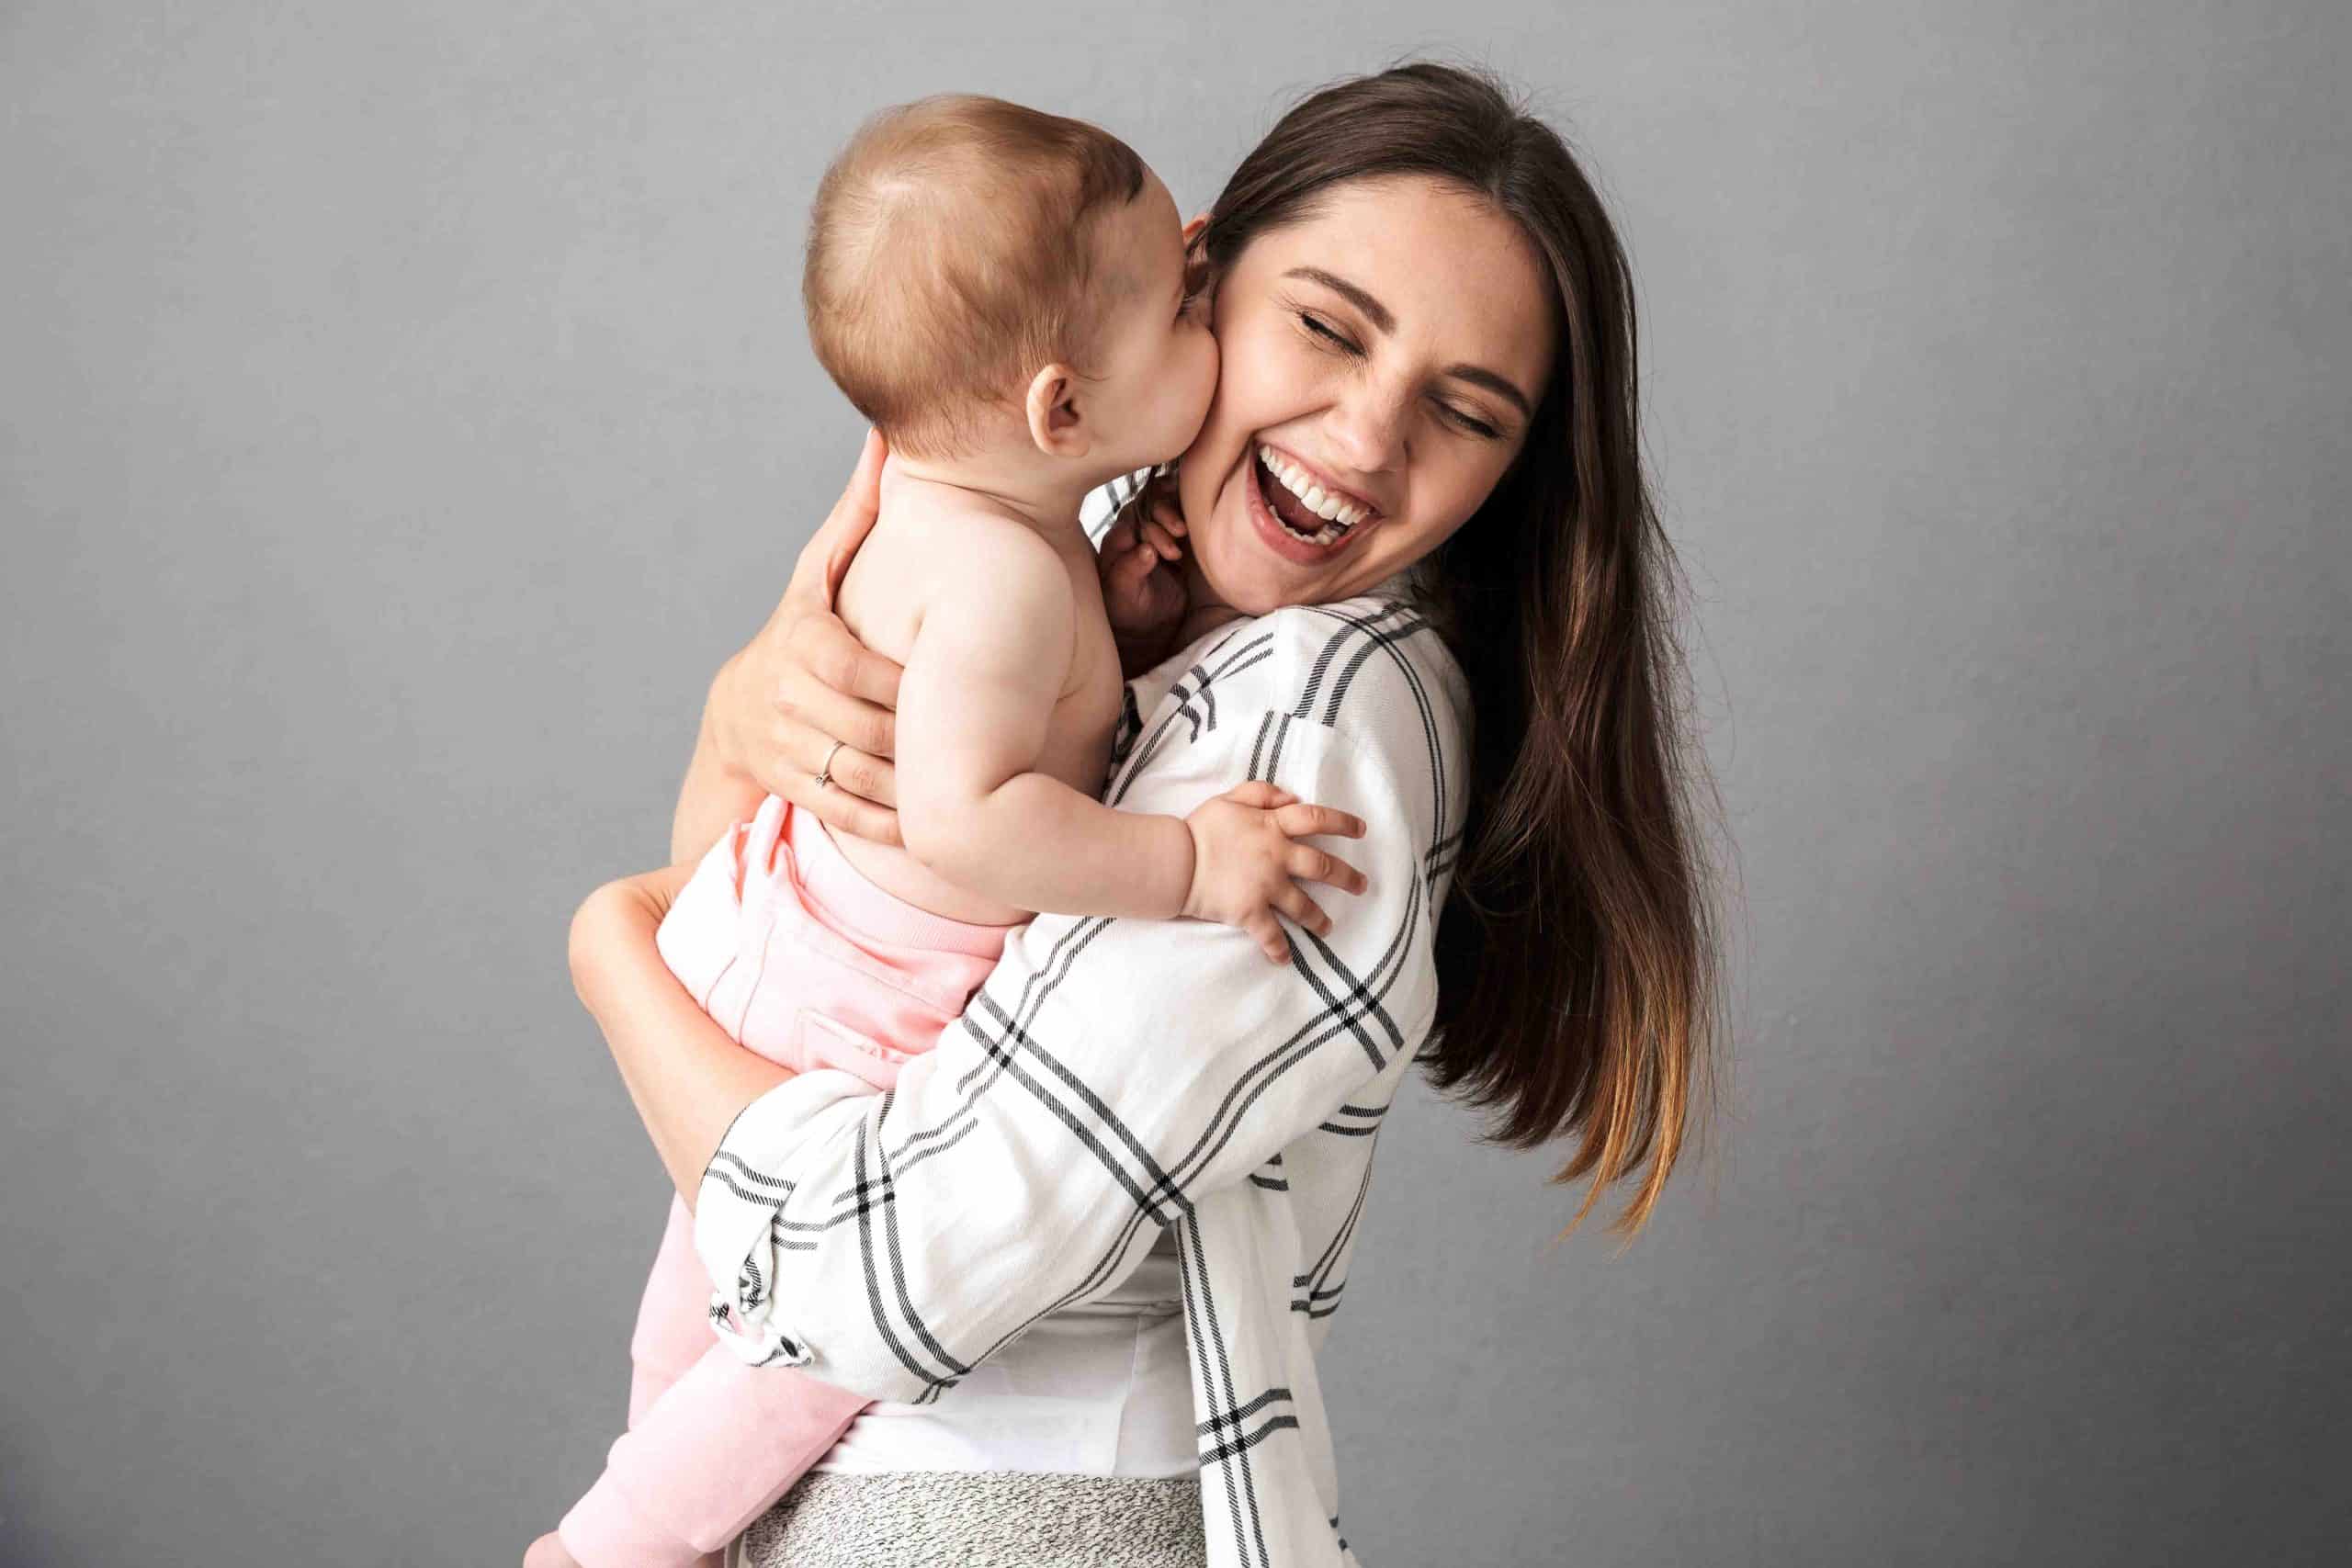 <p><span style="font-size: 16pt;">Motherhood is one of the happiest experiences that a woman can have. However, in order to make it that rainbowy you have to put some efforts.  Here are <strong>3 “Don’t” for a happy mother</strong>:</span></p> <p> </p> <h2><strong><span style="font-size: 20pt;">How To Make Motherhood Joyful<br /></span></strong></h2> <h3><strong>1. Be ashamed to ask for help</strong></h3> <p><span style="font-size: 16pt;">Nowadays, there is a picture-perfect image of a strong and independent I-can-do-it-all mother, who manages to do everything on her own. The truth is that image is not even close to being real. A mother has so many chores and needs of her own, that she cannot physically manage without someone to help her.</span></p> <p><span style="font-size: 16pt;">Once or twice a week a woman needs to have some time for herself, get manicure, meet up with a friend or have a movie night.  <strong>When the mother is happy, then everyone is happy. </strong>For this reason, you should ask for help, whenever you need it.</span></p> <p><img class="alignnone wp-image-25311 size-full" src="https://lifewithkids.cuterascals.com/wp-content/uploads/2020/10/How-to-Make-Motherhood-Joyful_-3-Dont-for-a-Happy-Mother.png" alt="How to Make Motherhood Joyful? 3 “Don’t” for a Happy Mother" width="750" height="1550" /></p> <h3><strong>2. Compare what you have to what others have</strong></h3> <p><span style="font-size: 16pt;">There is always a mother, who seems to be better than you, whose baby knows three languages by the age of 2 and could recite the alphabet backwards before it could even say “mama”. Unfortunately, people cannot help but lie and reveal only the good things to the public.</span></p> <p><span style="font-size: 16pt;">If you continue comparing your achievements to those of other people, than you and your child will be the saddest people in the neighborhood. Blame, insecurity and anxiety are a destructive force that leaves behind nothing but sadness.</span></p>